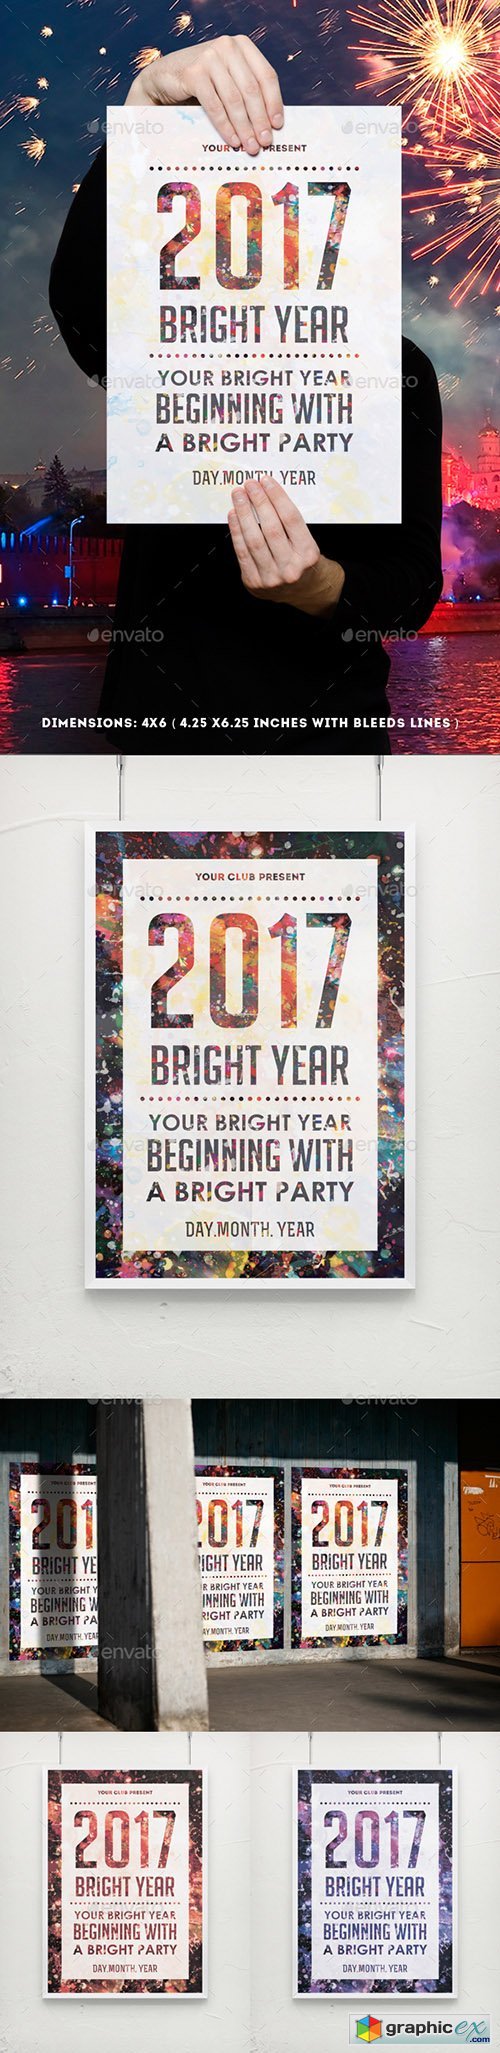 Bright Paris Party Poster Template